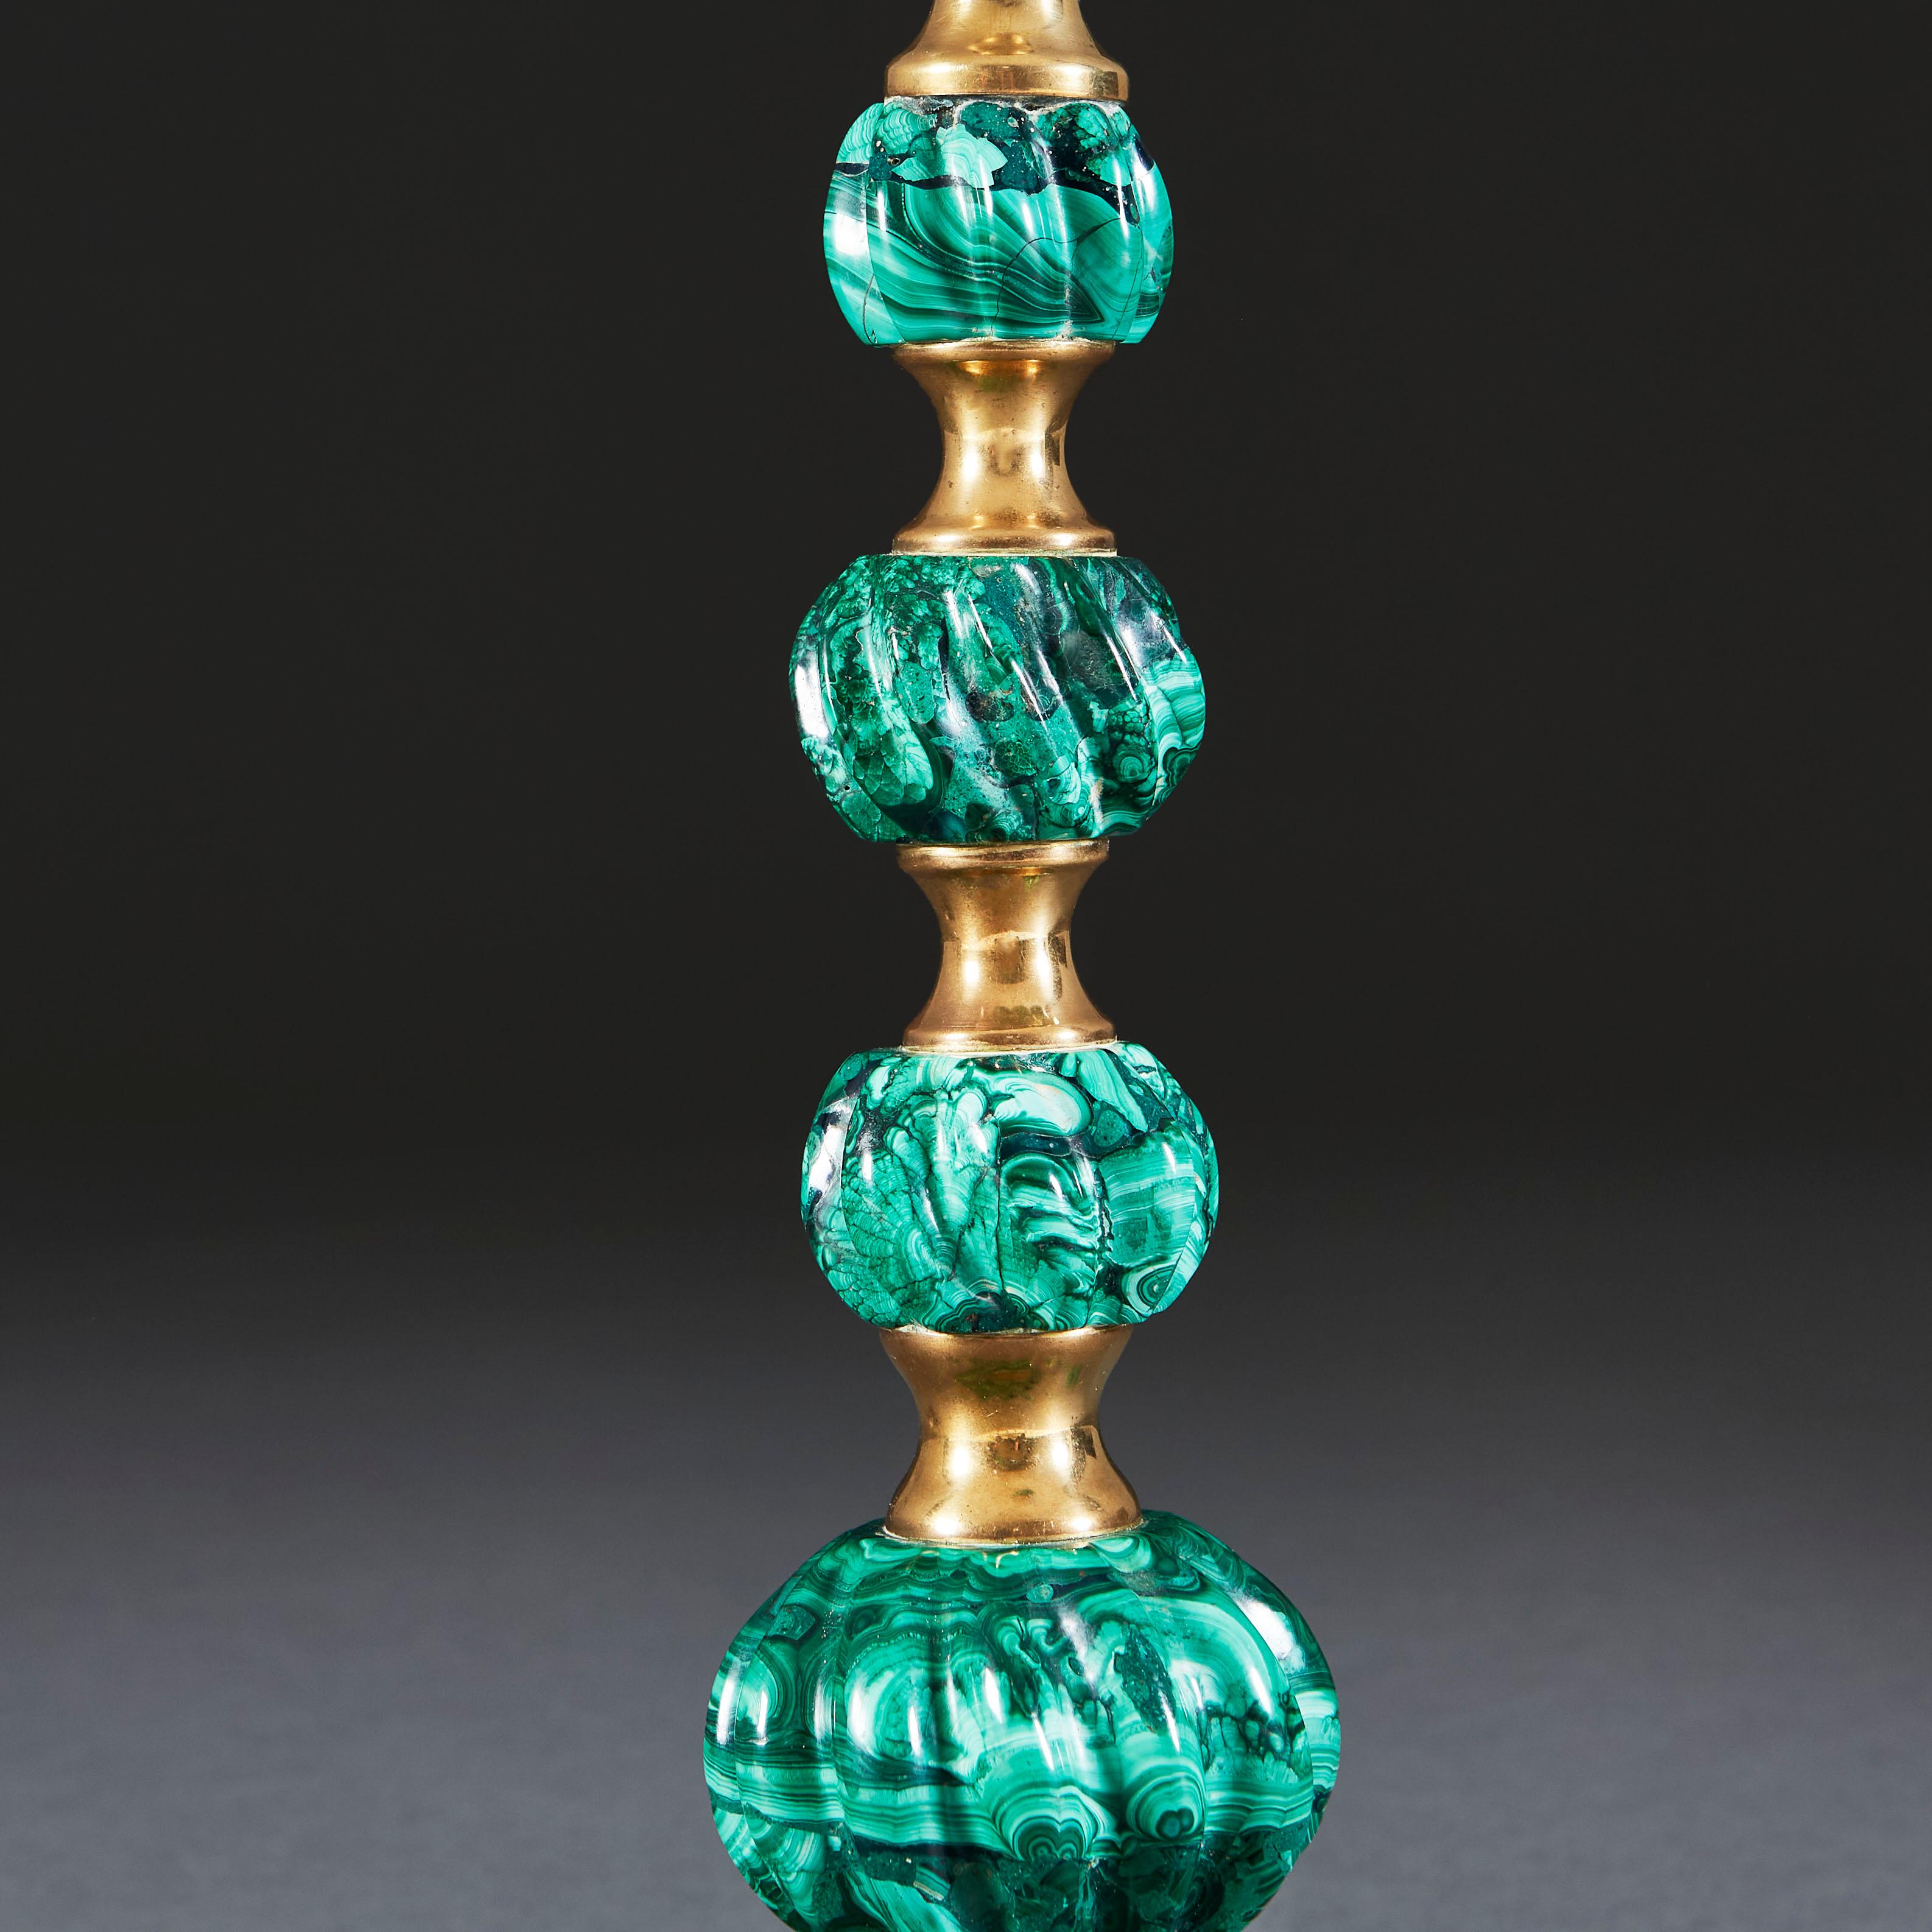 An unusual early 20th century lamp formed of stacked gadrooned green malachite beads of increasing scale, spaced with brass concave metalwork elements.

Currently wired for the UK. 

Lampshade not included.